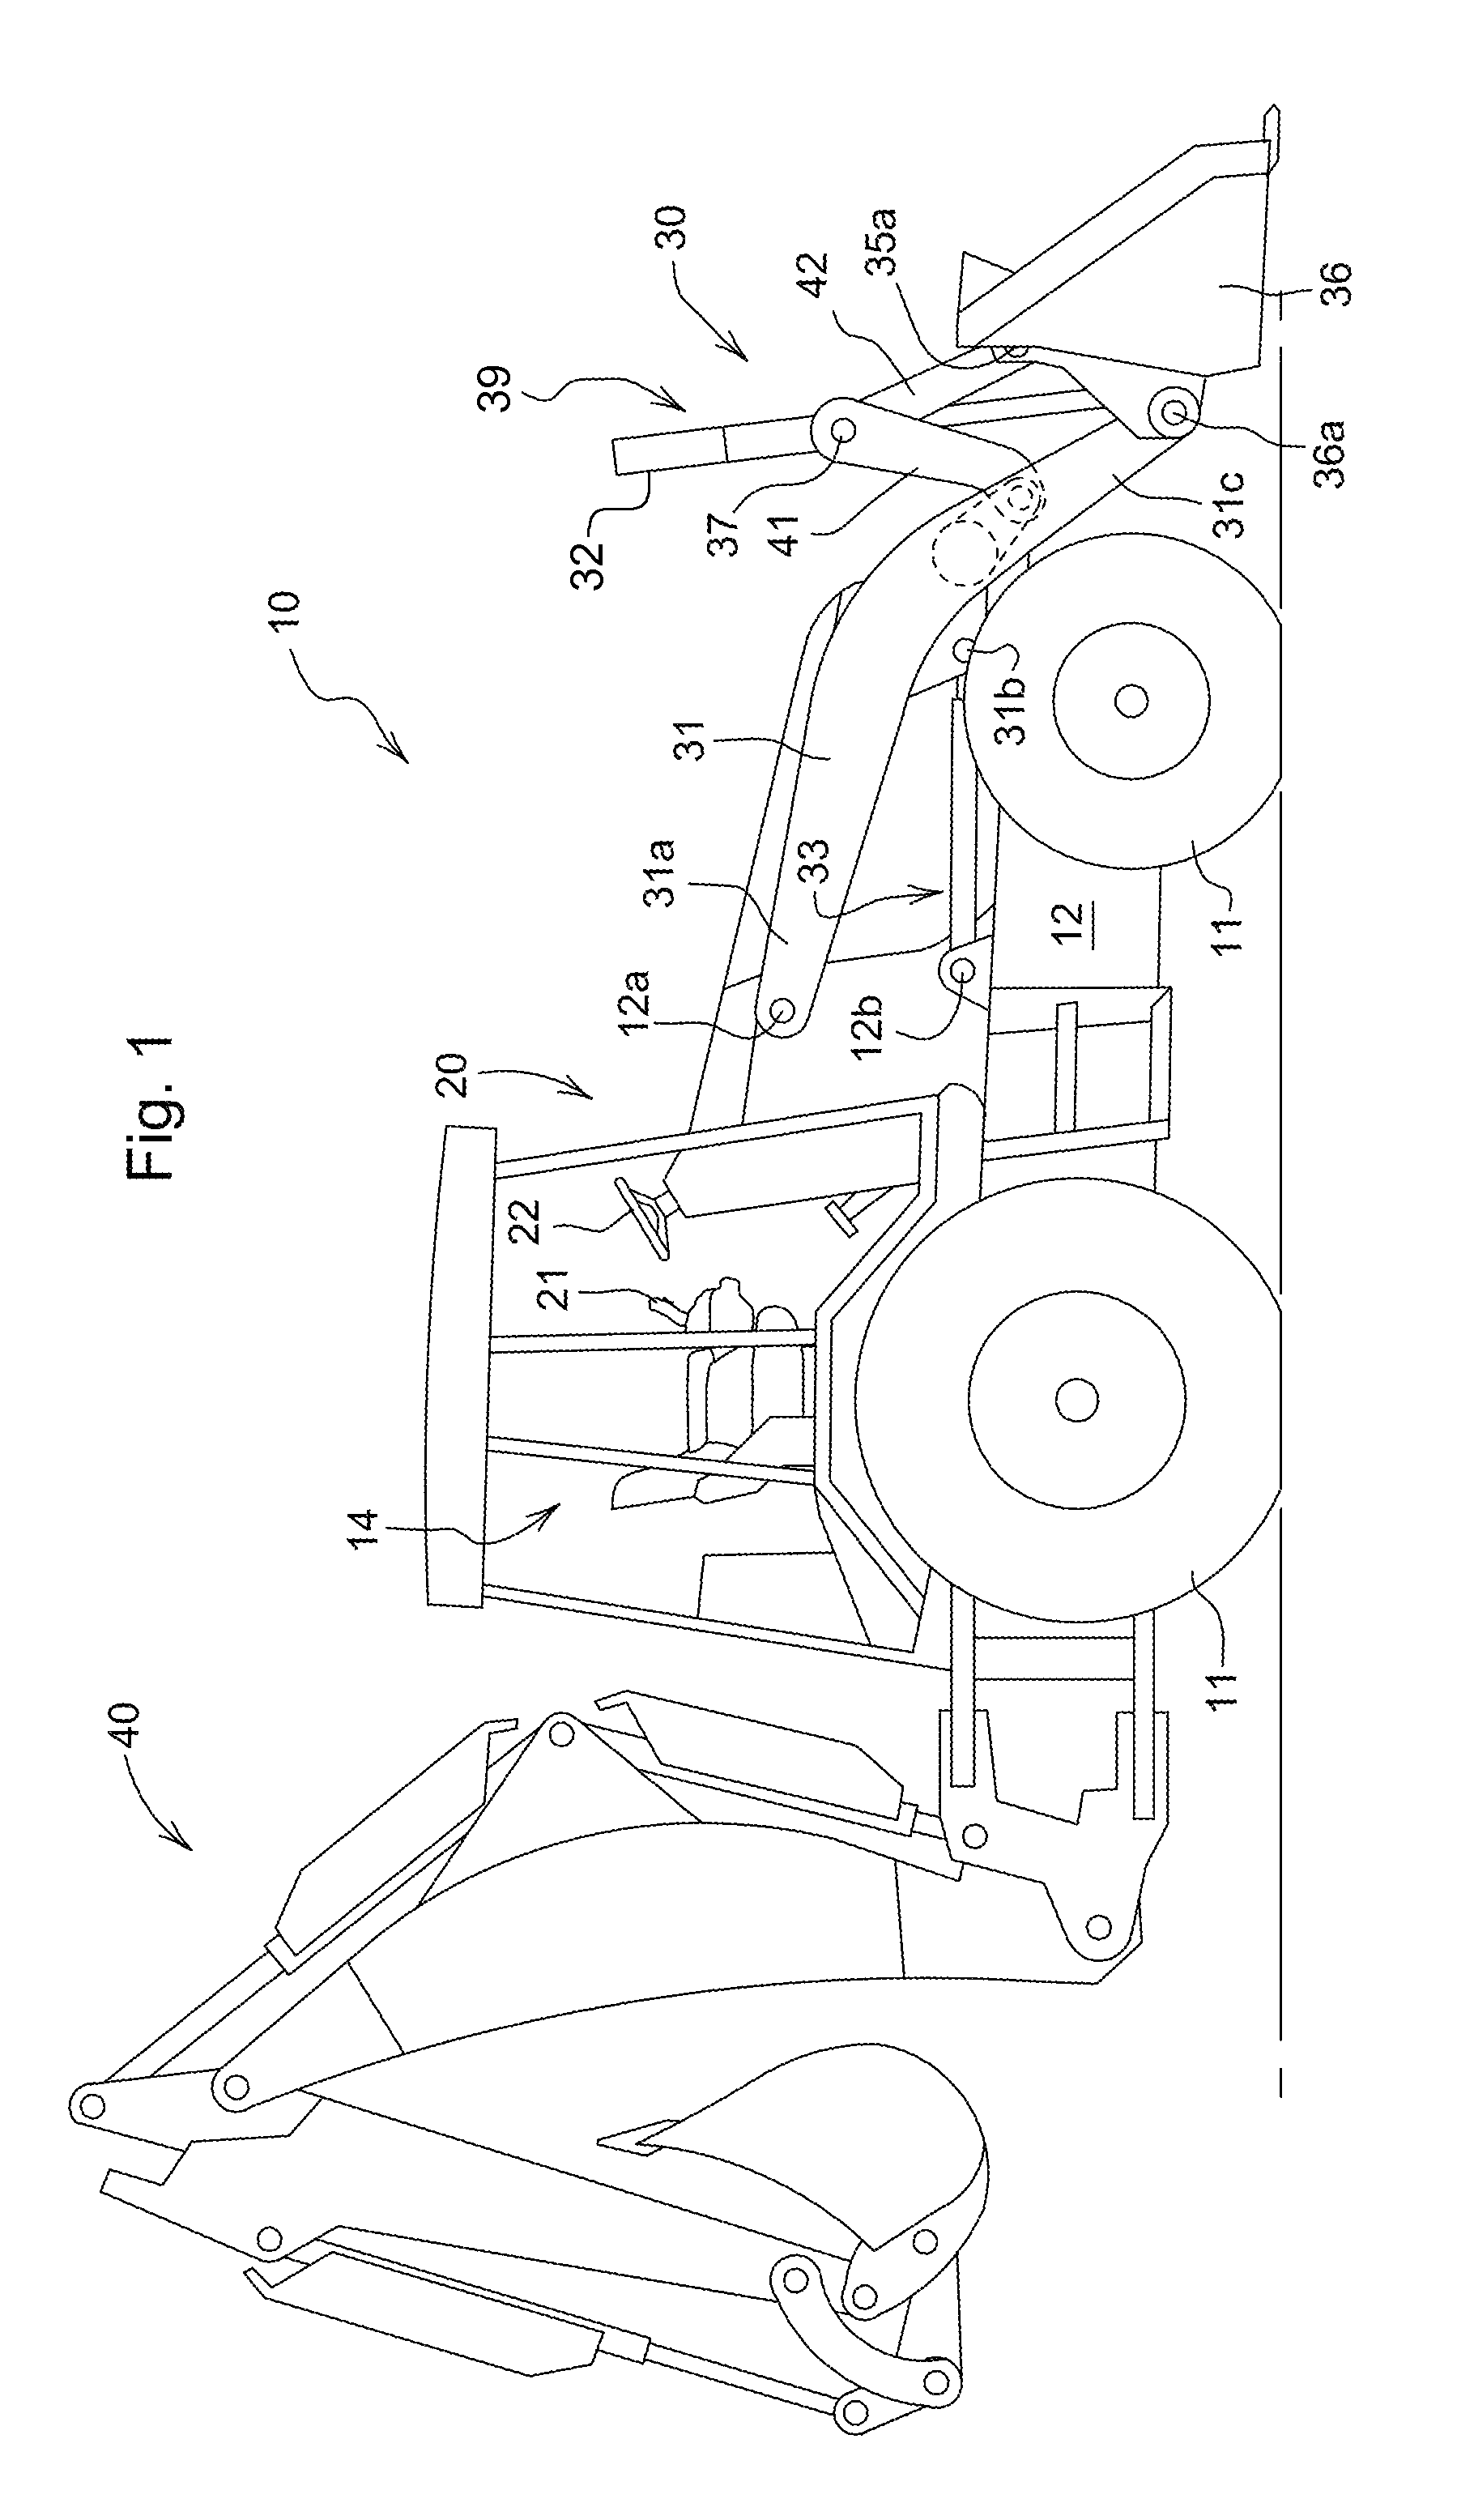 Electronic parallel lift and return to carry or float on a backhoe loader